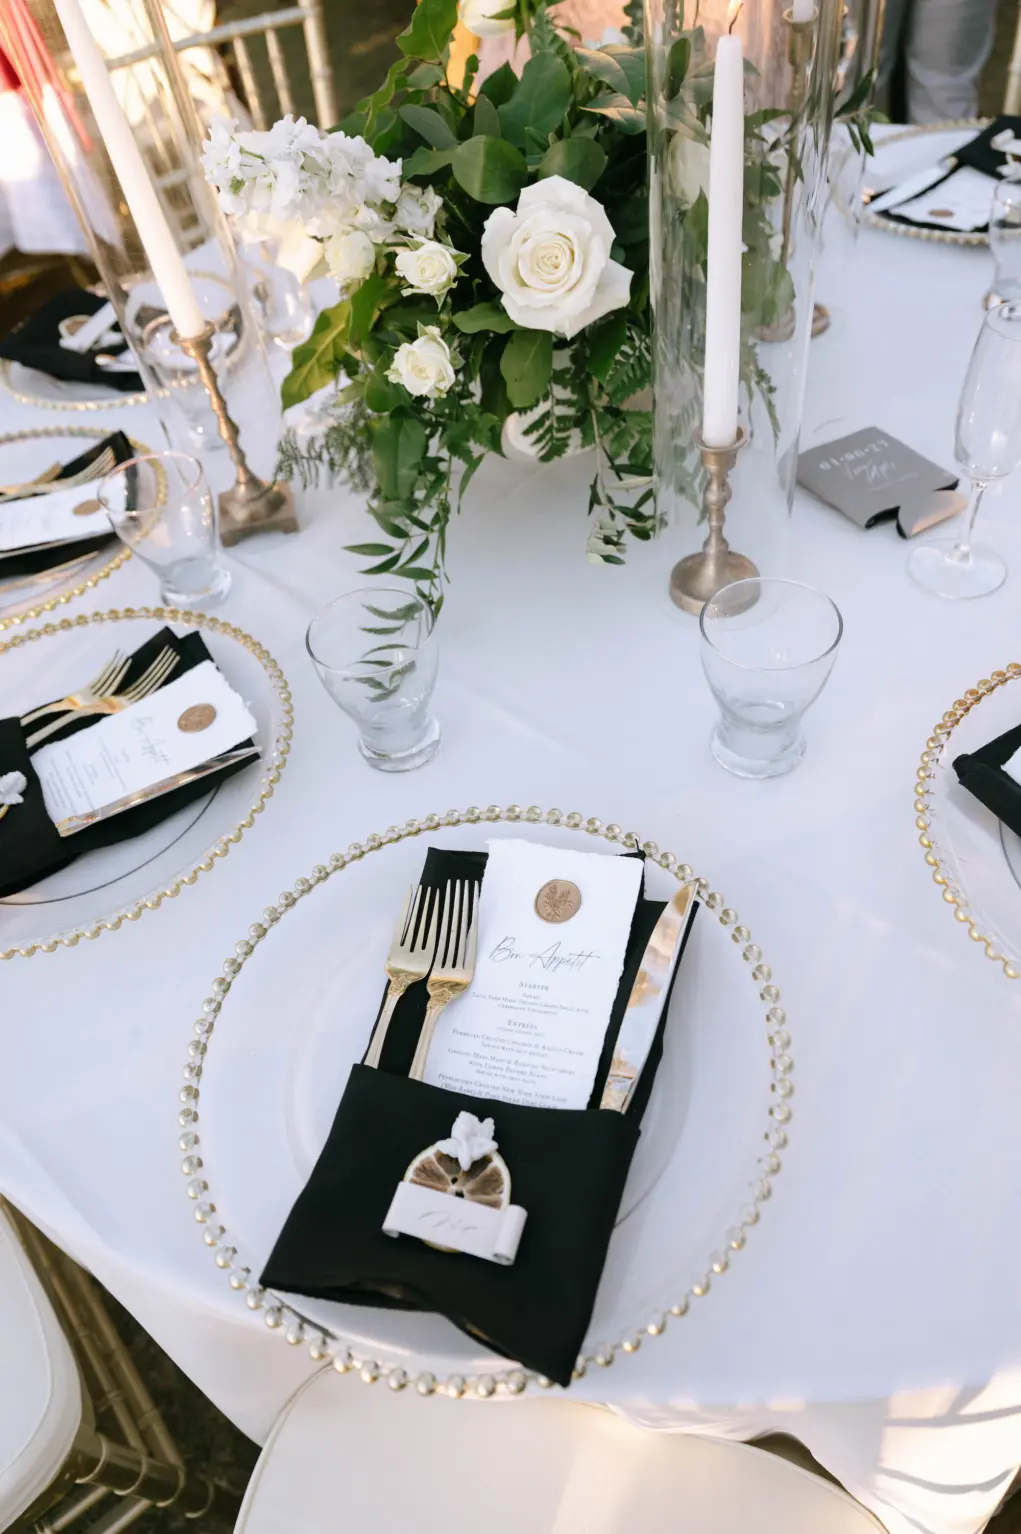 Glamorous Gold, White, and Black Wedding Reception Table Setting Decor Ideas | Gold Beaded Glass Chargers, Black Napkin Linen, White Rose, Greenery and Taper Candle Centerpiece Inspiration | Place Setting Menu Card with Wax Seal